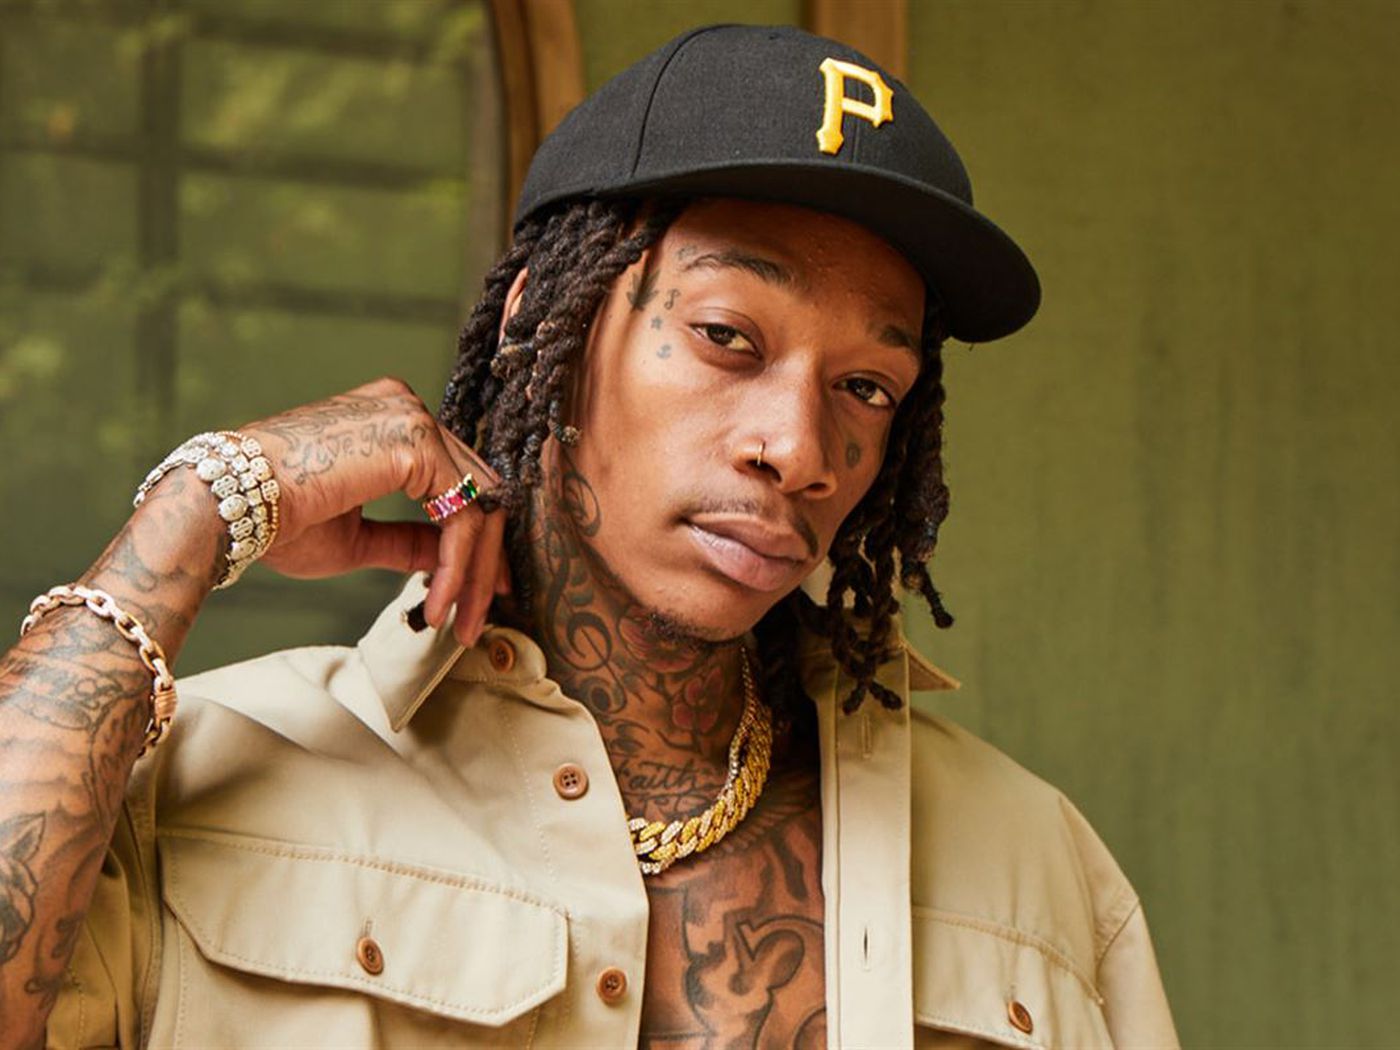 Wiz Khalifa Quotes. Wiz's Quotes About Love, Life, and Happiness